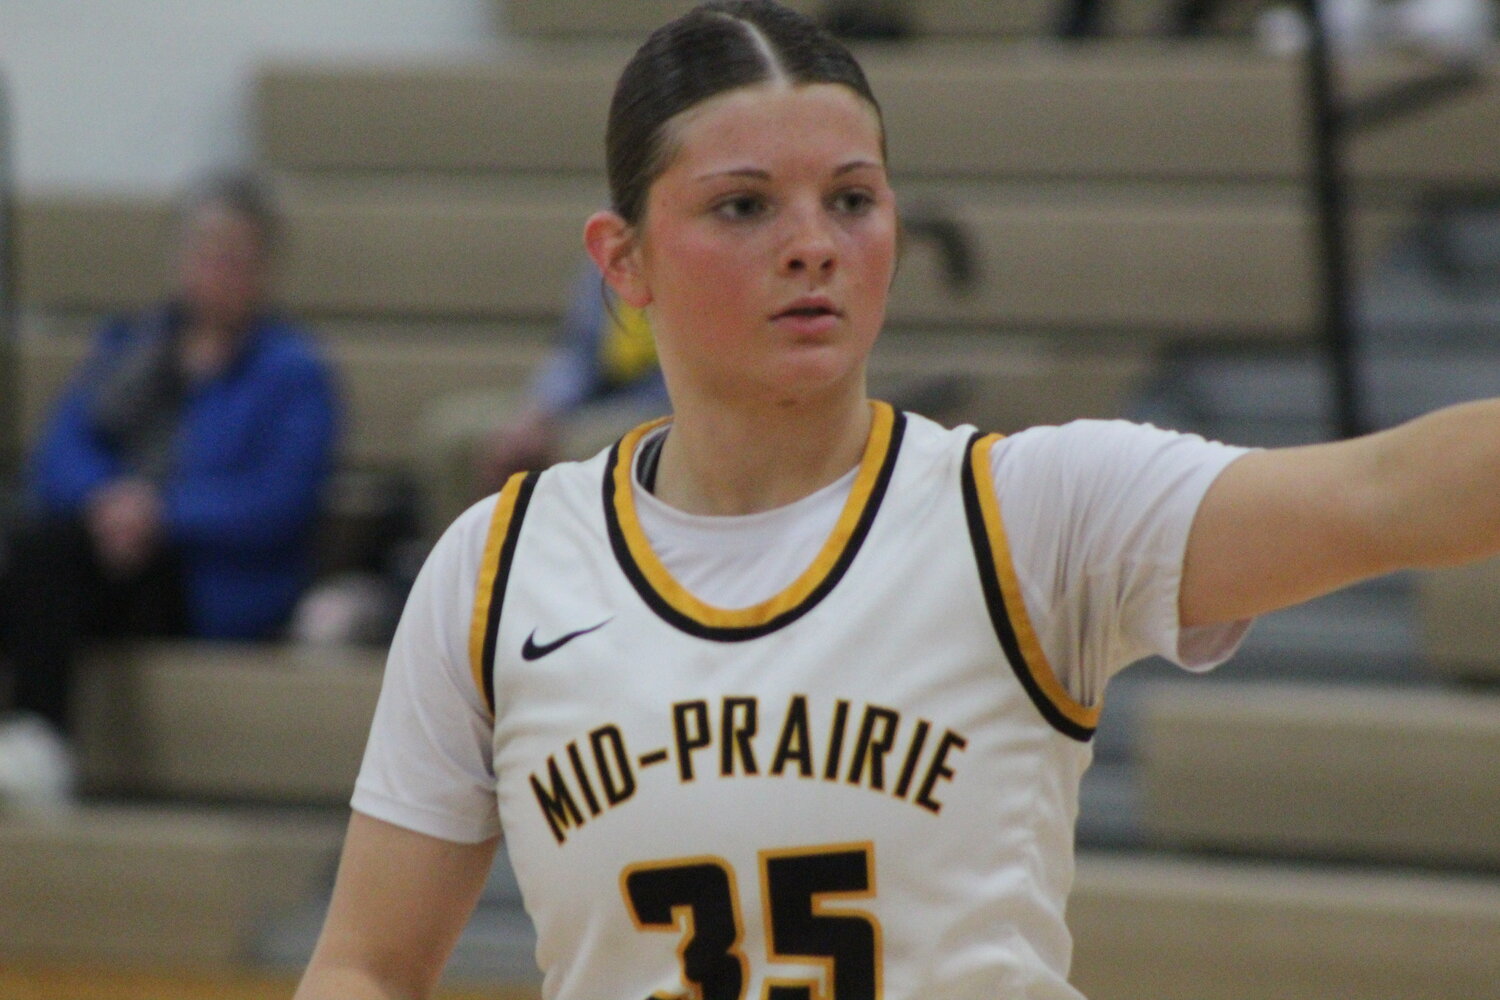 Mid-Prairie senior Nora Pennington scored a game-high 13 points in her final home game.